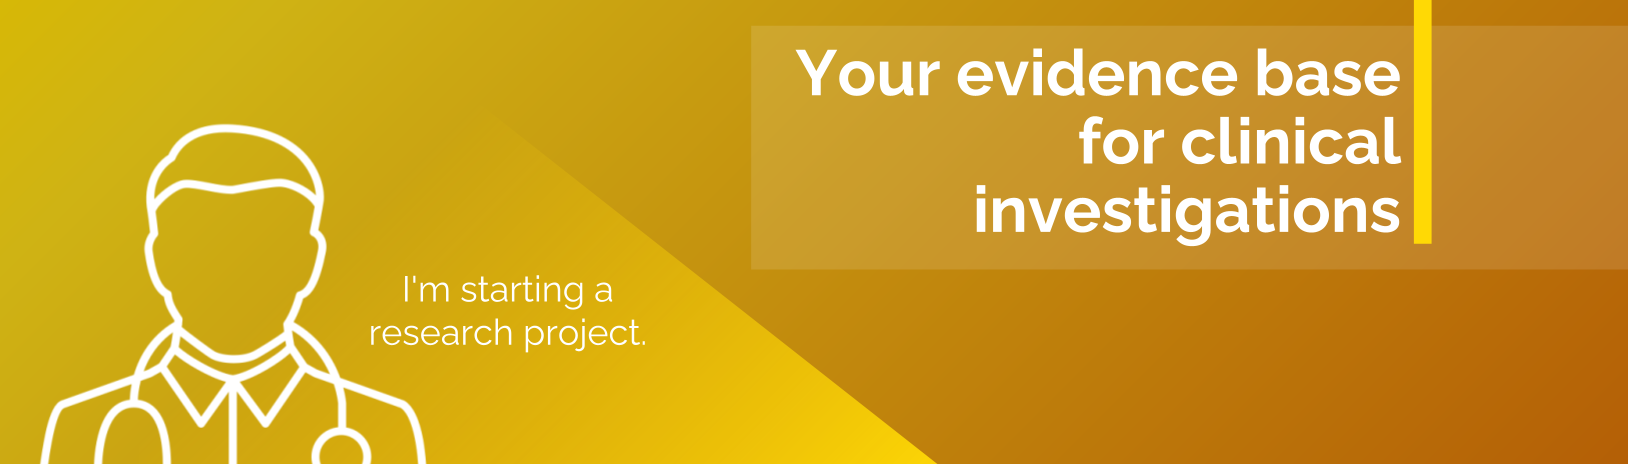 EPOCH is your evidence base for clinical investigations